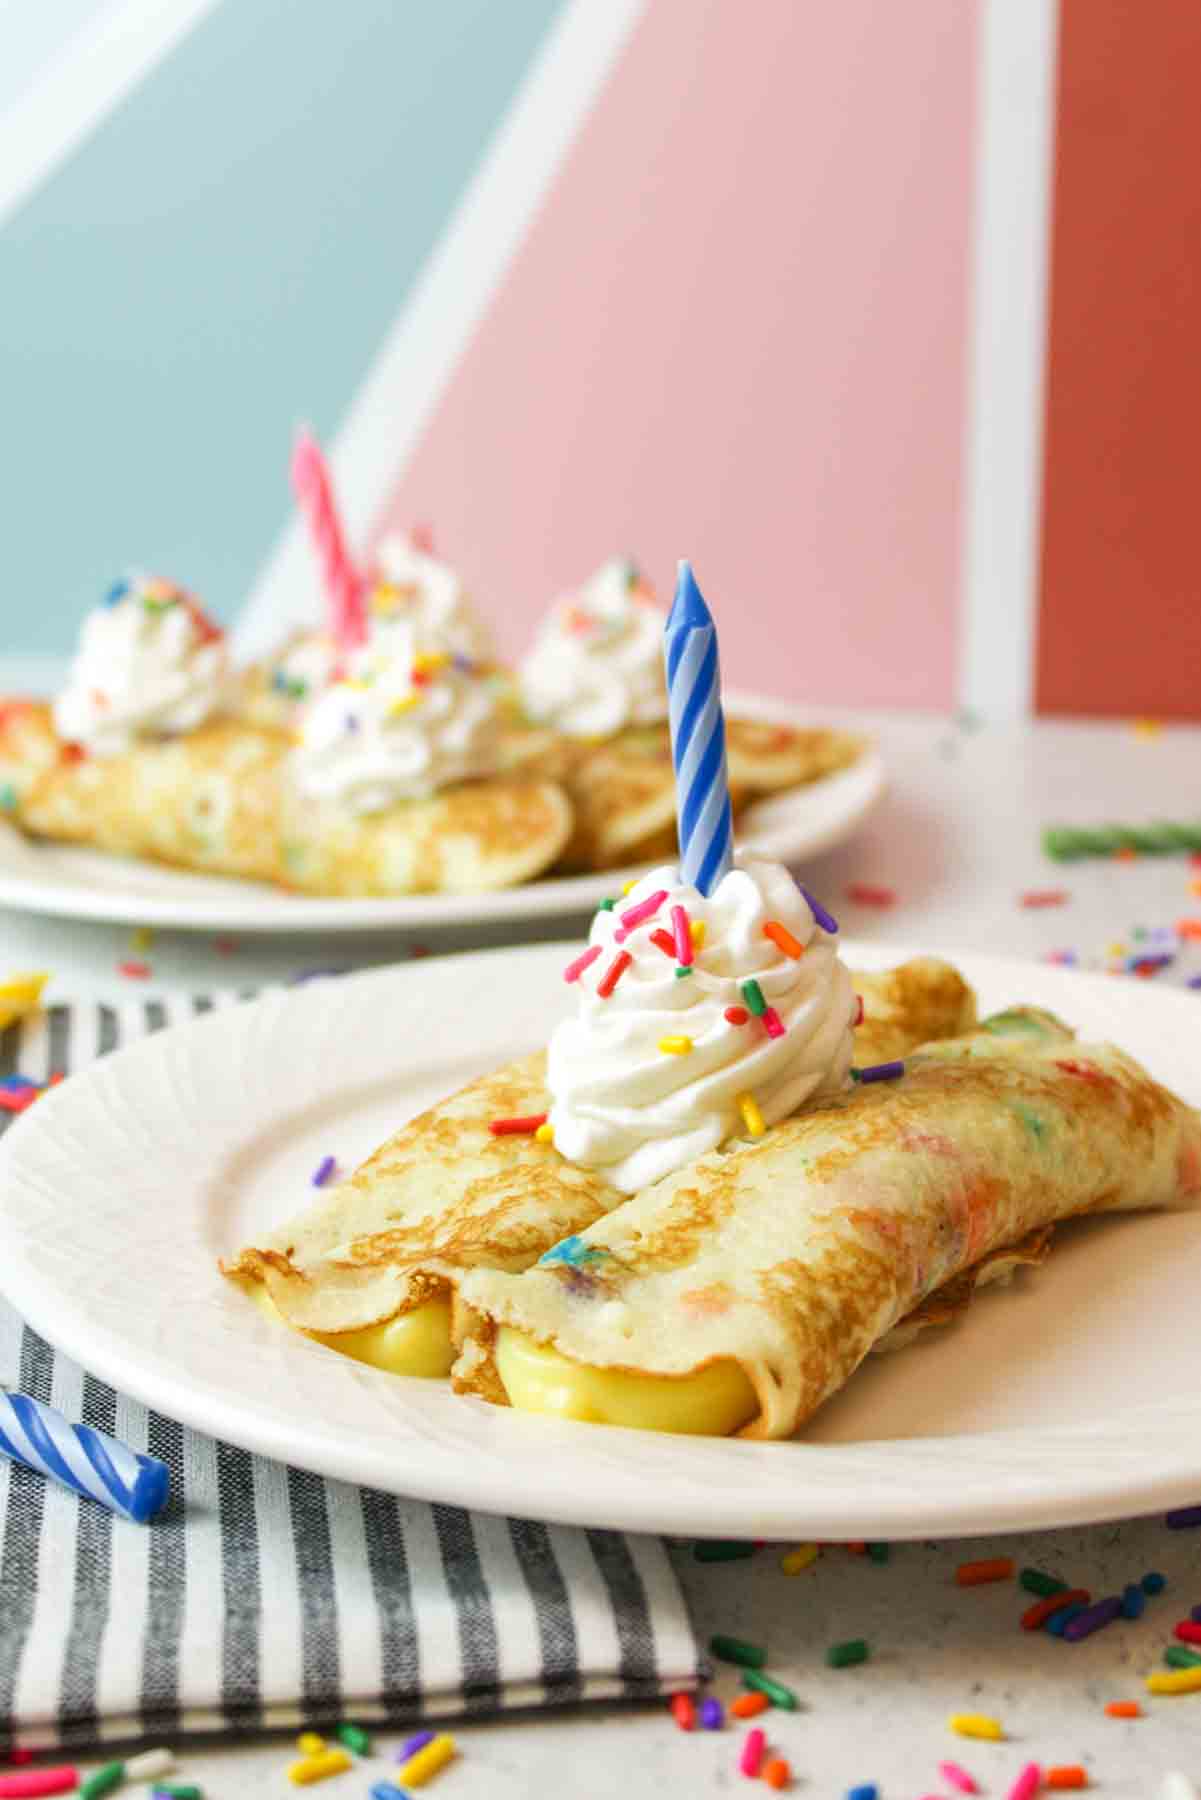 birthday cake crepes with whipped cream, sprinkles, and candles served on white plates